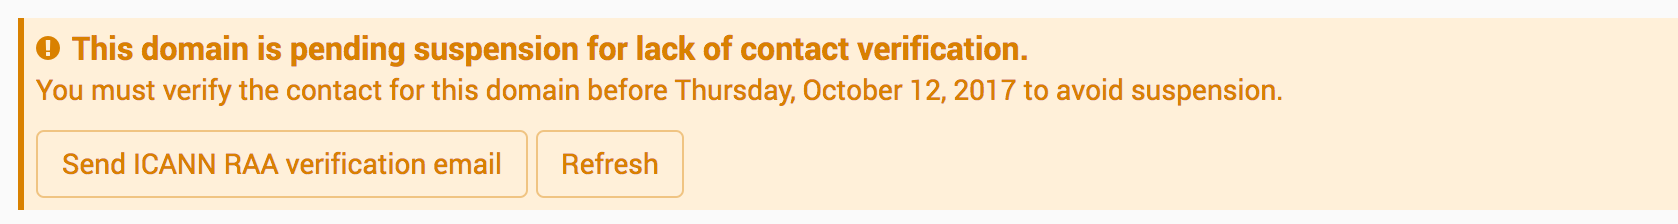 ICANN resend email verification